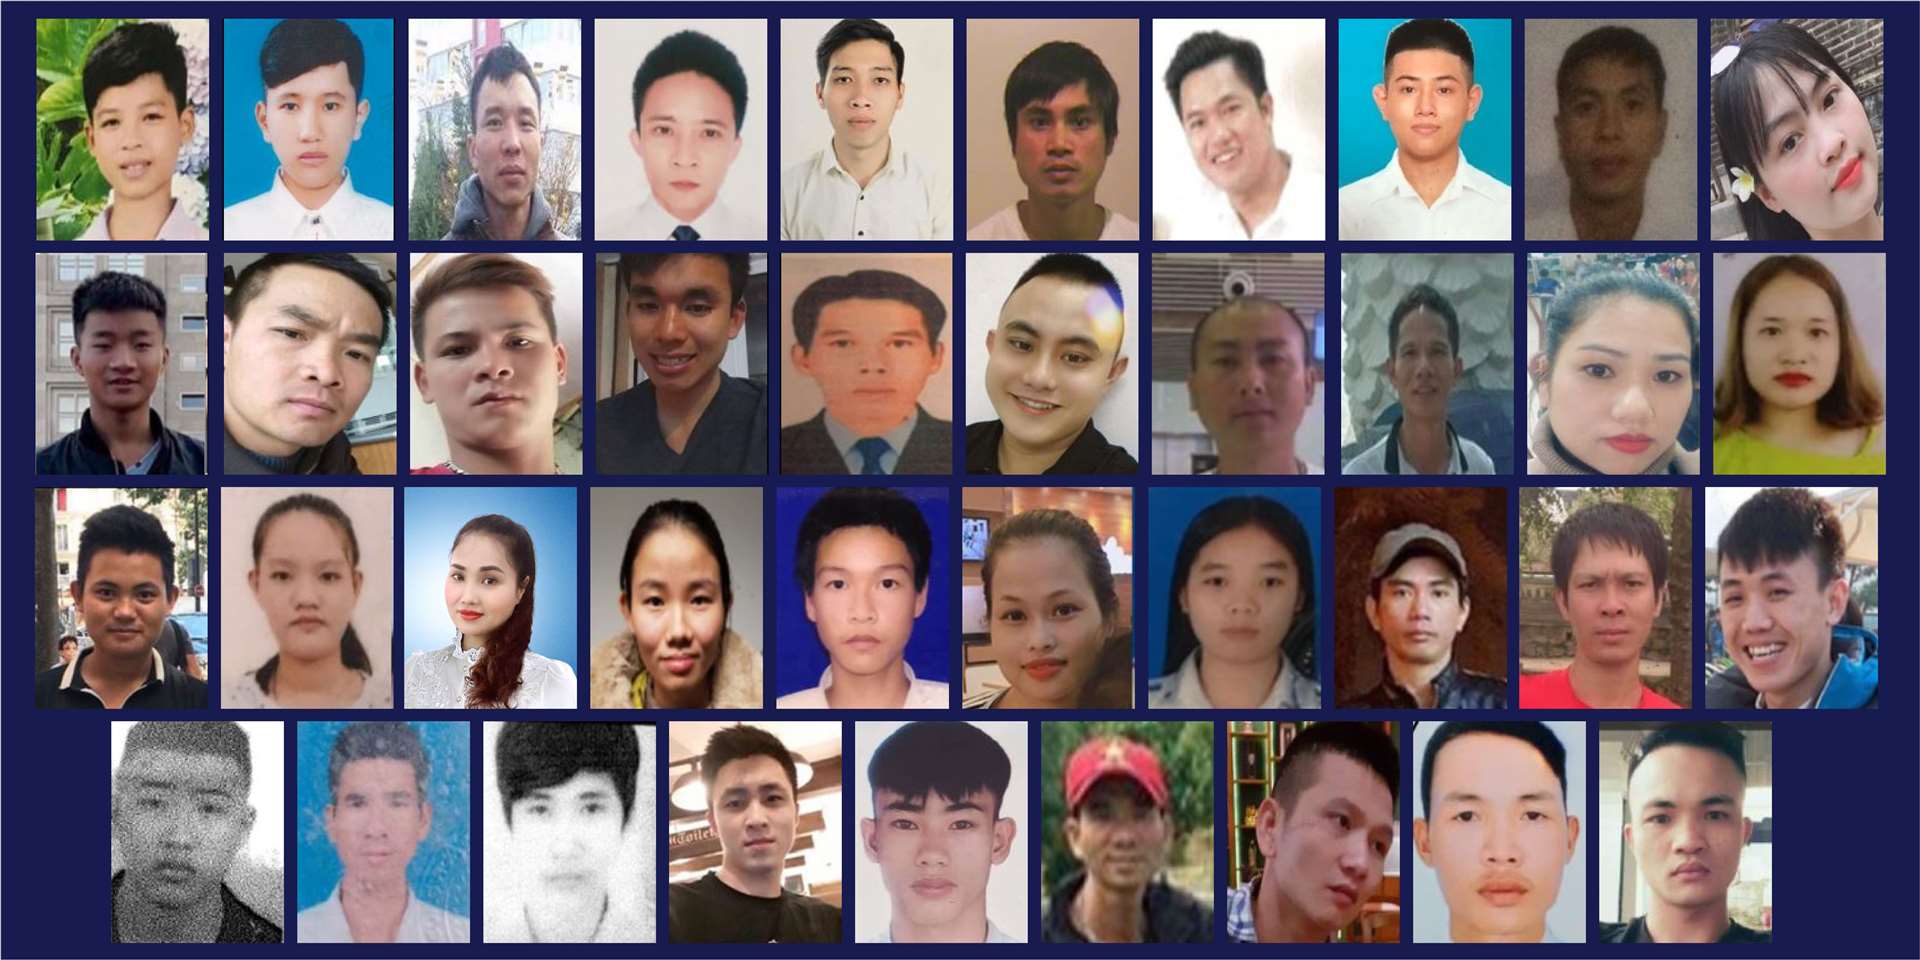 Family handout photo issued by Essex Police of (left to right top row) Dinh Dinh Binh, Nguyen Minh Quang, Nguyen Huy Phong, Le Van Ha, Nguyen Van Hiep, Bui Phan Thang, Nguyen Van Hung, Nguyen Huy Hung, Nguyen Tien Dung, Pham Thi Tra My, (left to right second row) Tran Khanh Tho, Nguyen Van Nhan, Vo Ngoc Nam, Vo Van Linh, Nguyen Ba Vu Hung, Vo Nhan Du, Tran Hai Loc, Tran Manh Hung, Nguyen Thi Van, Bui Thi Nhung, (third row left to right) Hoang Van Tiep, Tran Thi Ngoc, Phan Thi Thanh,Tran Thi Tho, Duong Minh Tuan, Pham Thi Ngoc Oanh, Tran Thi Mai Nhung, Le Trong Thanh, Nguyen Ngoc Ha, Hoang Van Hoi, (bottom row left to right) Tran Ngoc Hieu, Cao Tien Dung, Dinh Dinh Thai Quyen, Dang Huu Tuyen, Nguyen Dinh Luong , Cao Huy Thanh, Nguyen Trong Thai, Nguyen Tho Tuan and Nguyen Dinh Tu, the 39 Vietnamese migrants, aged between 15 and 44, that were found dead in the back of a trailer (Essex Police/PA)